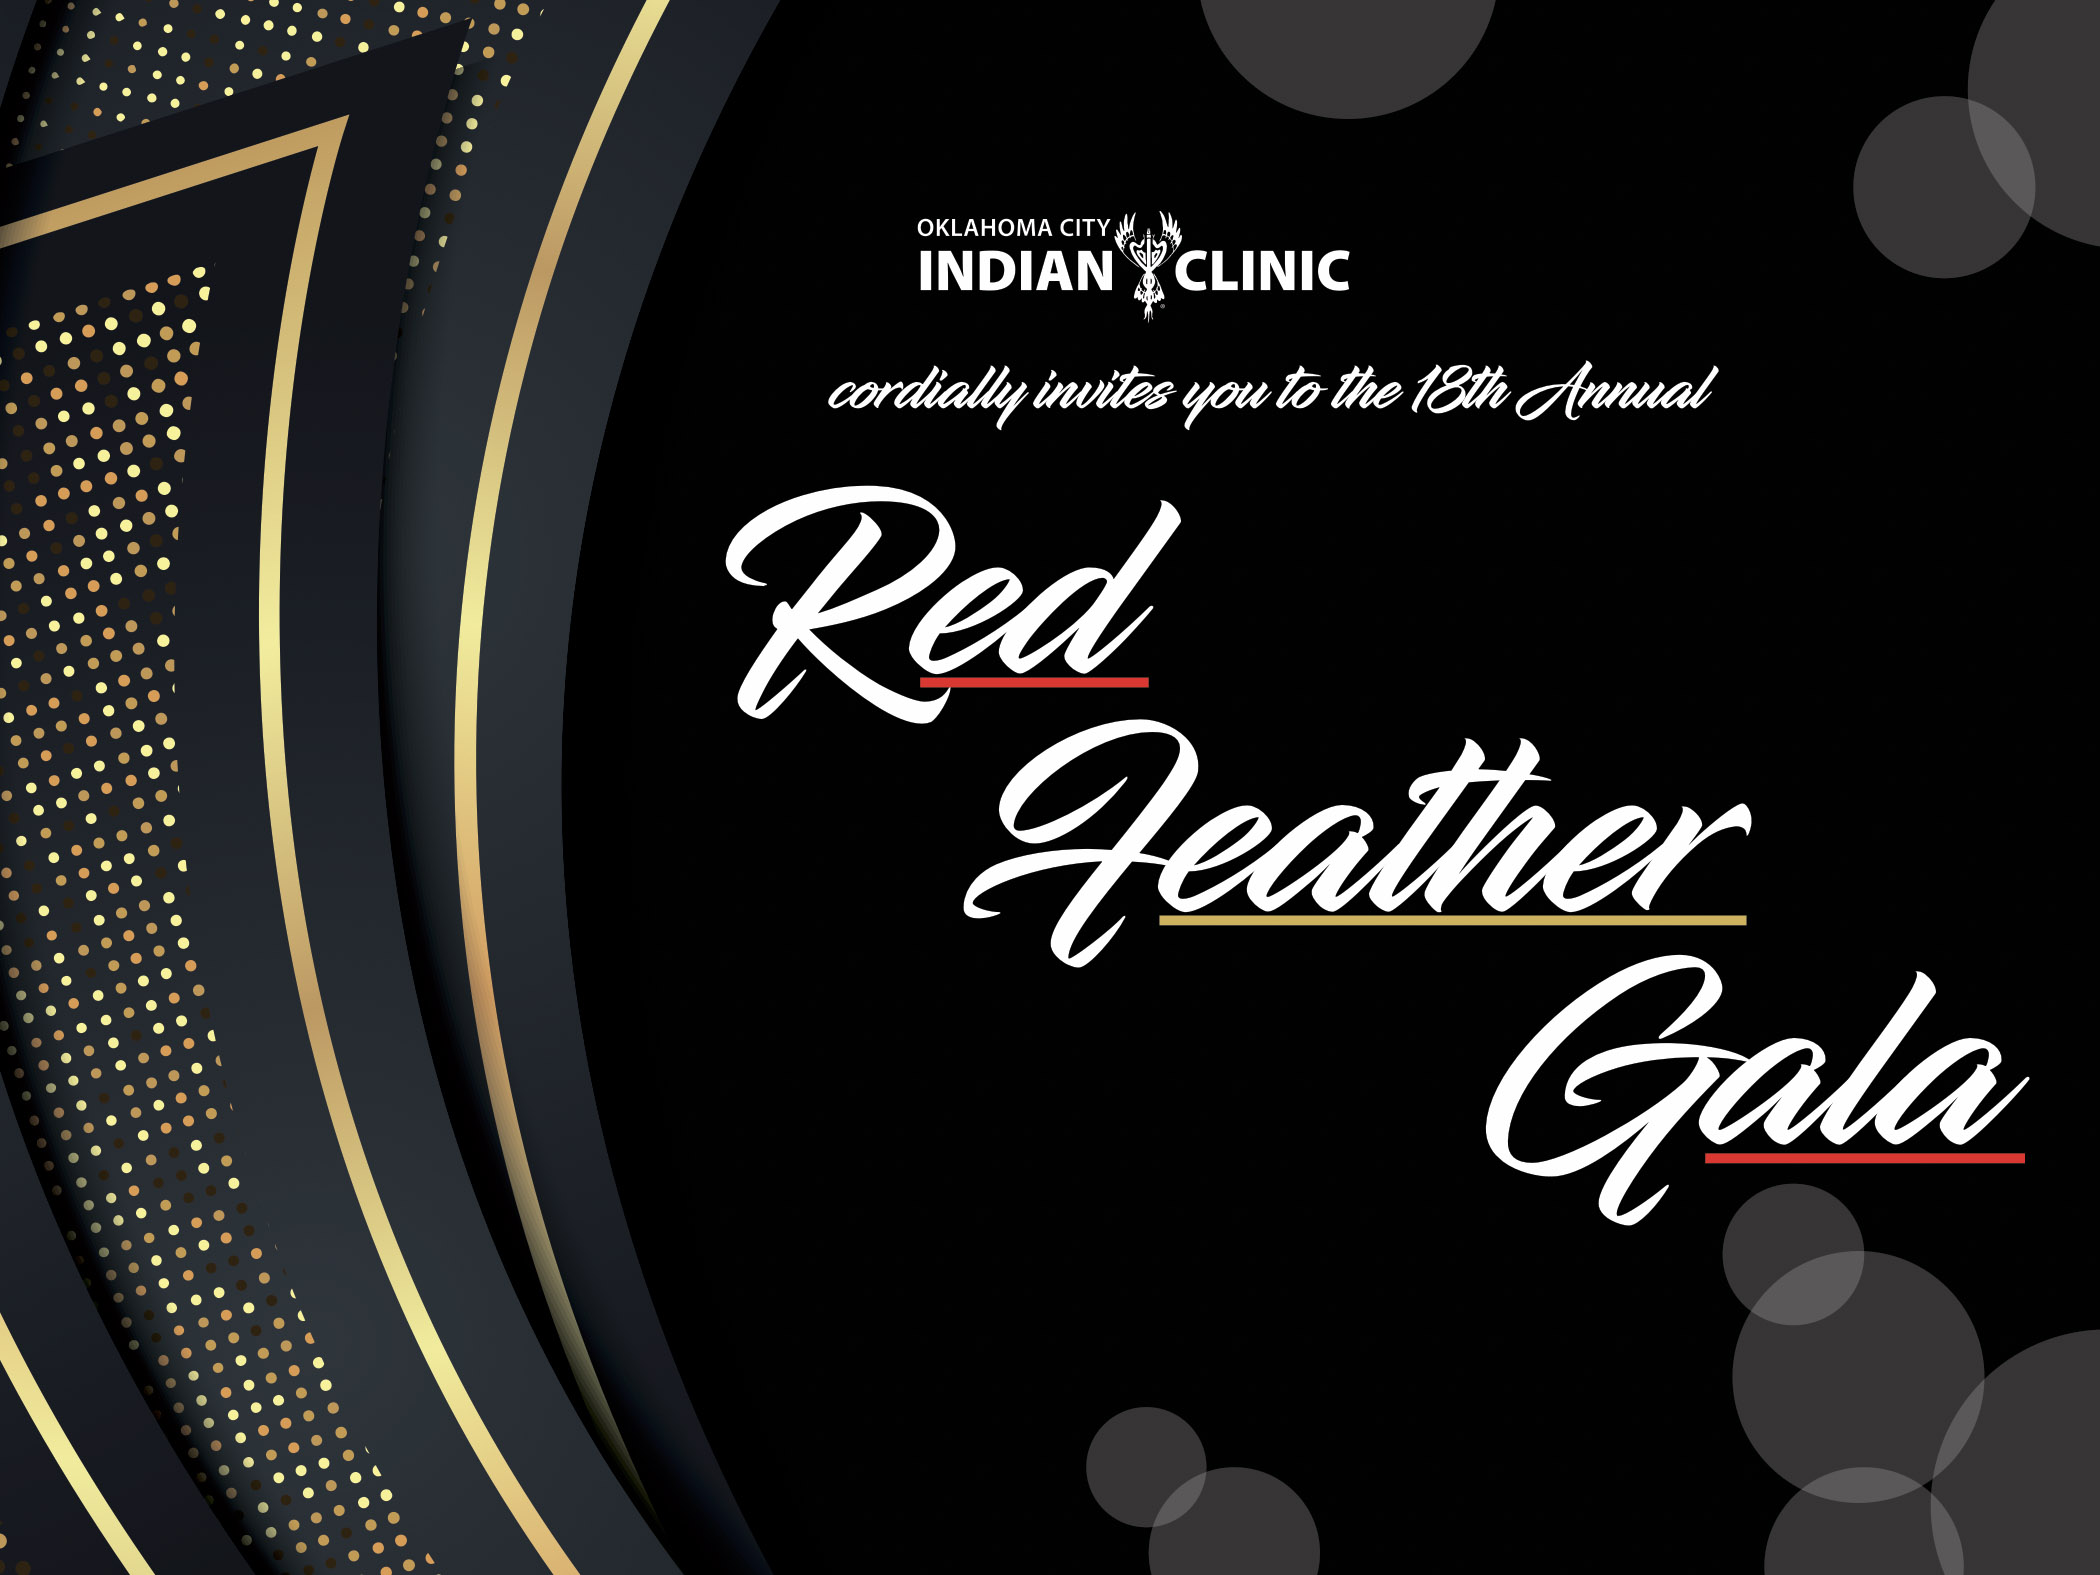 18th Annual Red Feather Gala